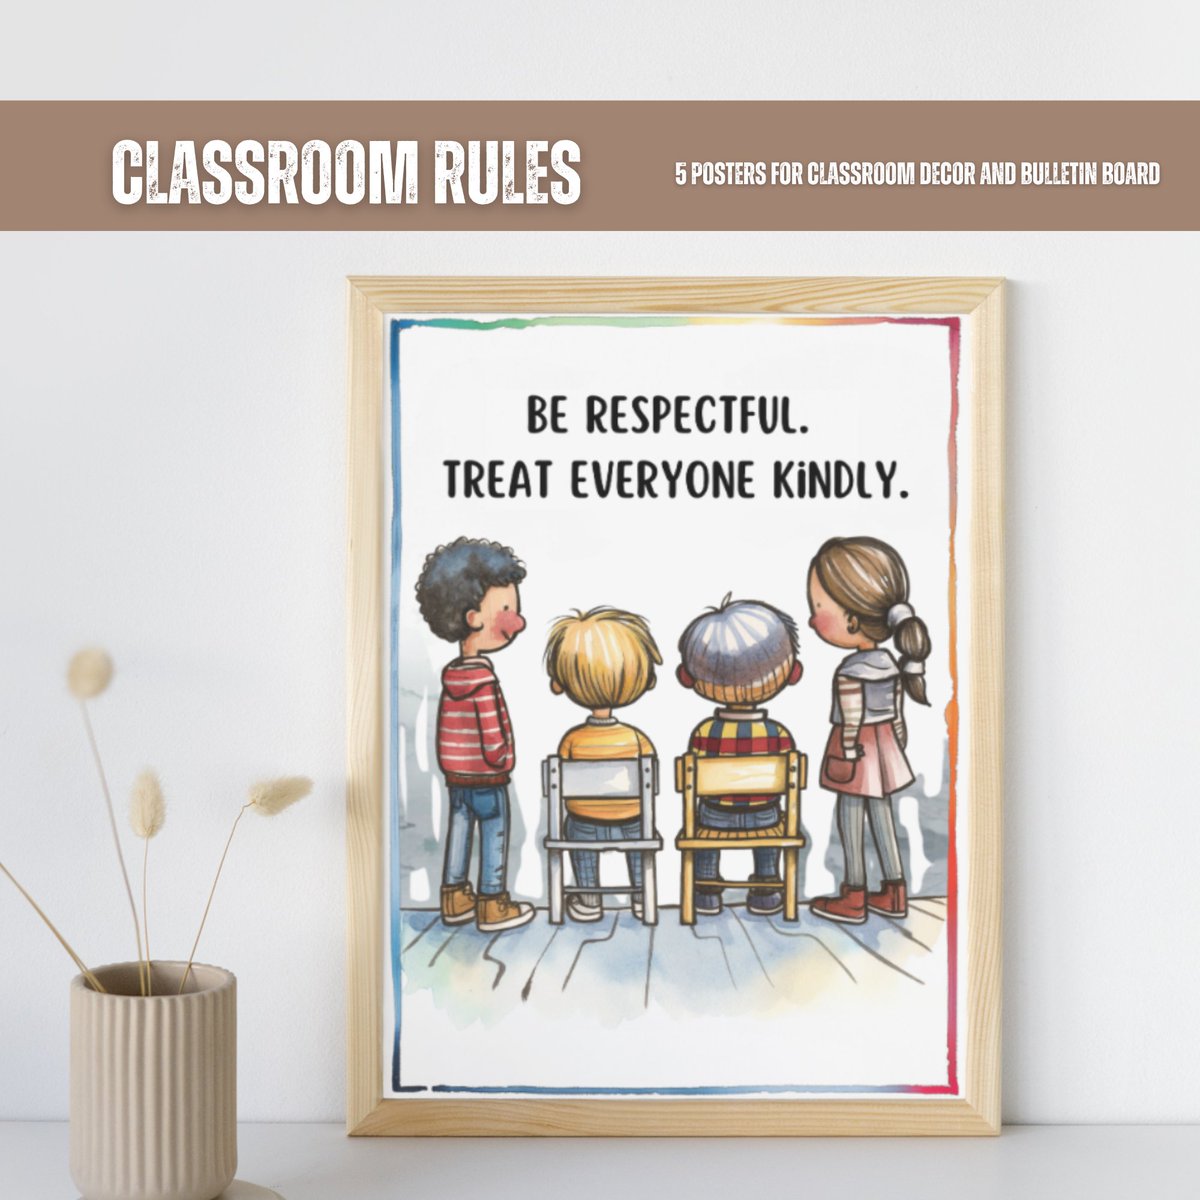 5 Printable Classroom Rules Posters for Classroom Decor and Bulletin Board #positiveaffirmations #classroomdecor #classroom #bulletinboards #printable #poster #school #student #teacher #backtoschool #classroomideas #classroomrules

teacherspayteachers.com/Product/5-Prin…